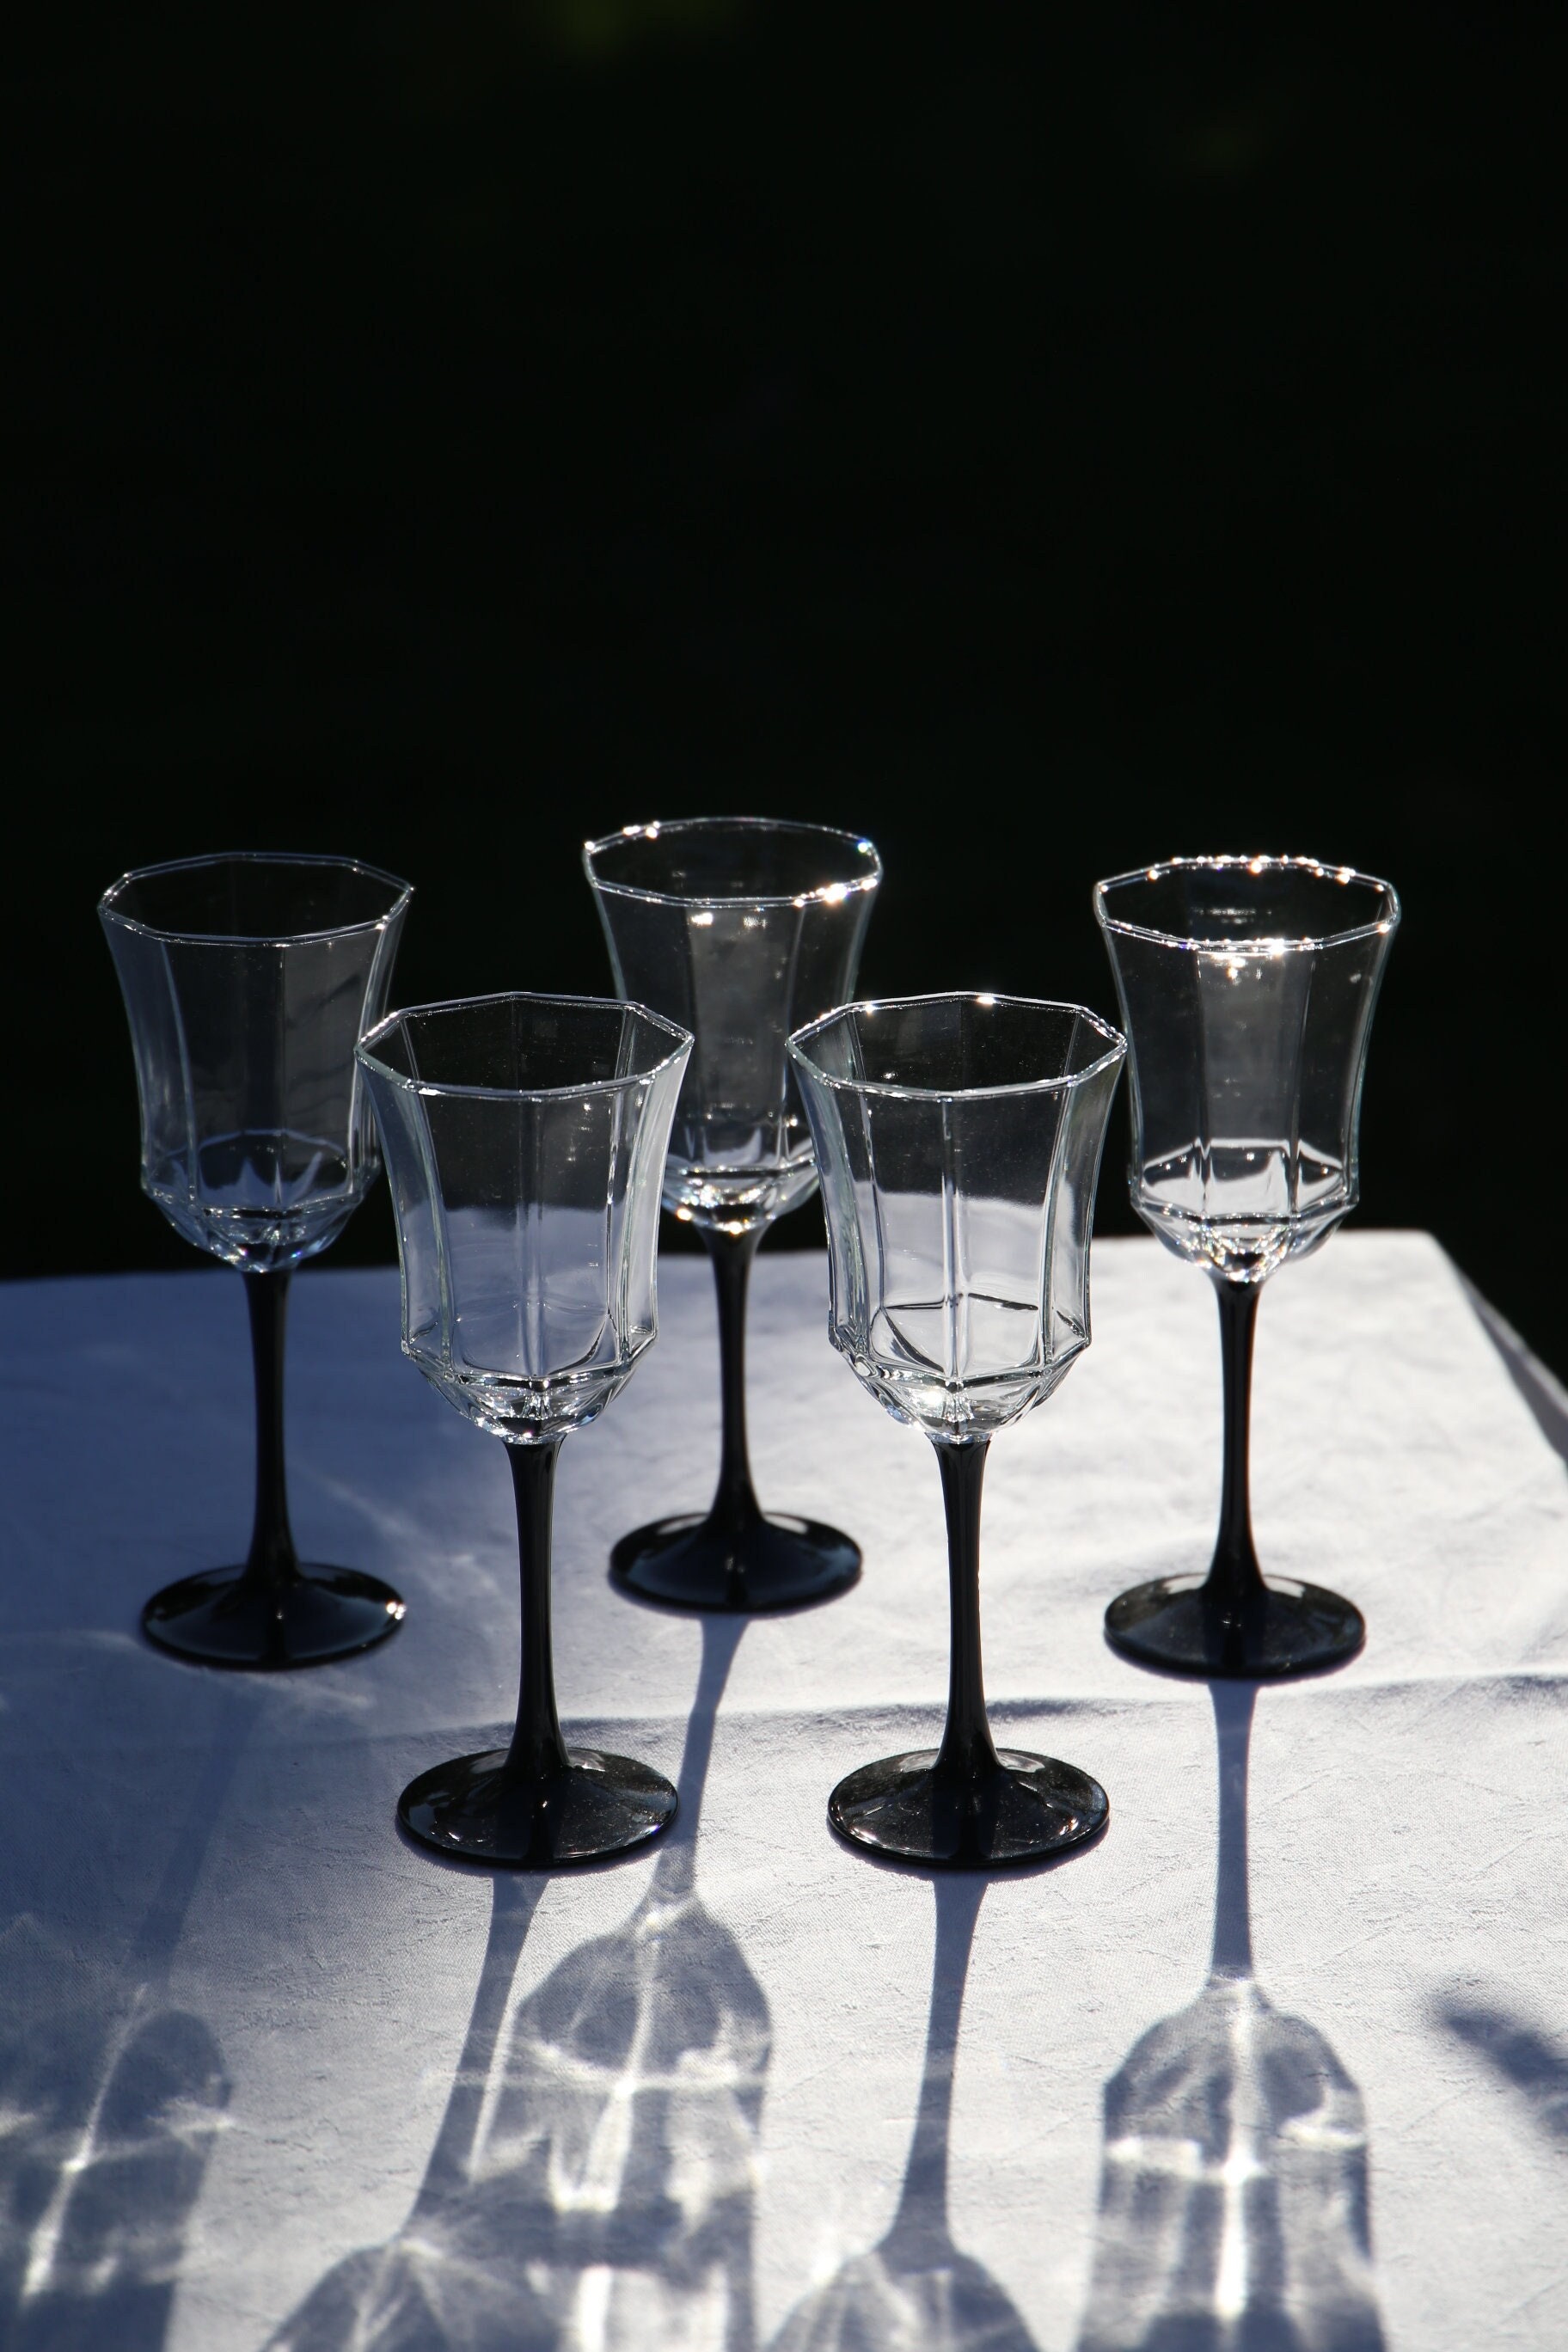 An Alluring and Rare Set of 7 Vintage French Luminarc Octime Tall Wine  Glasses with Oil Black Skinny Stems and Limited Edition Bevel Cut…